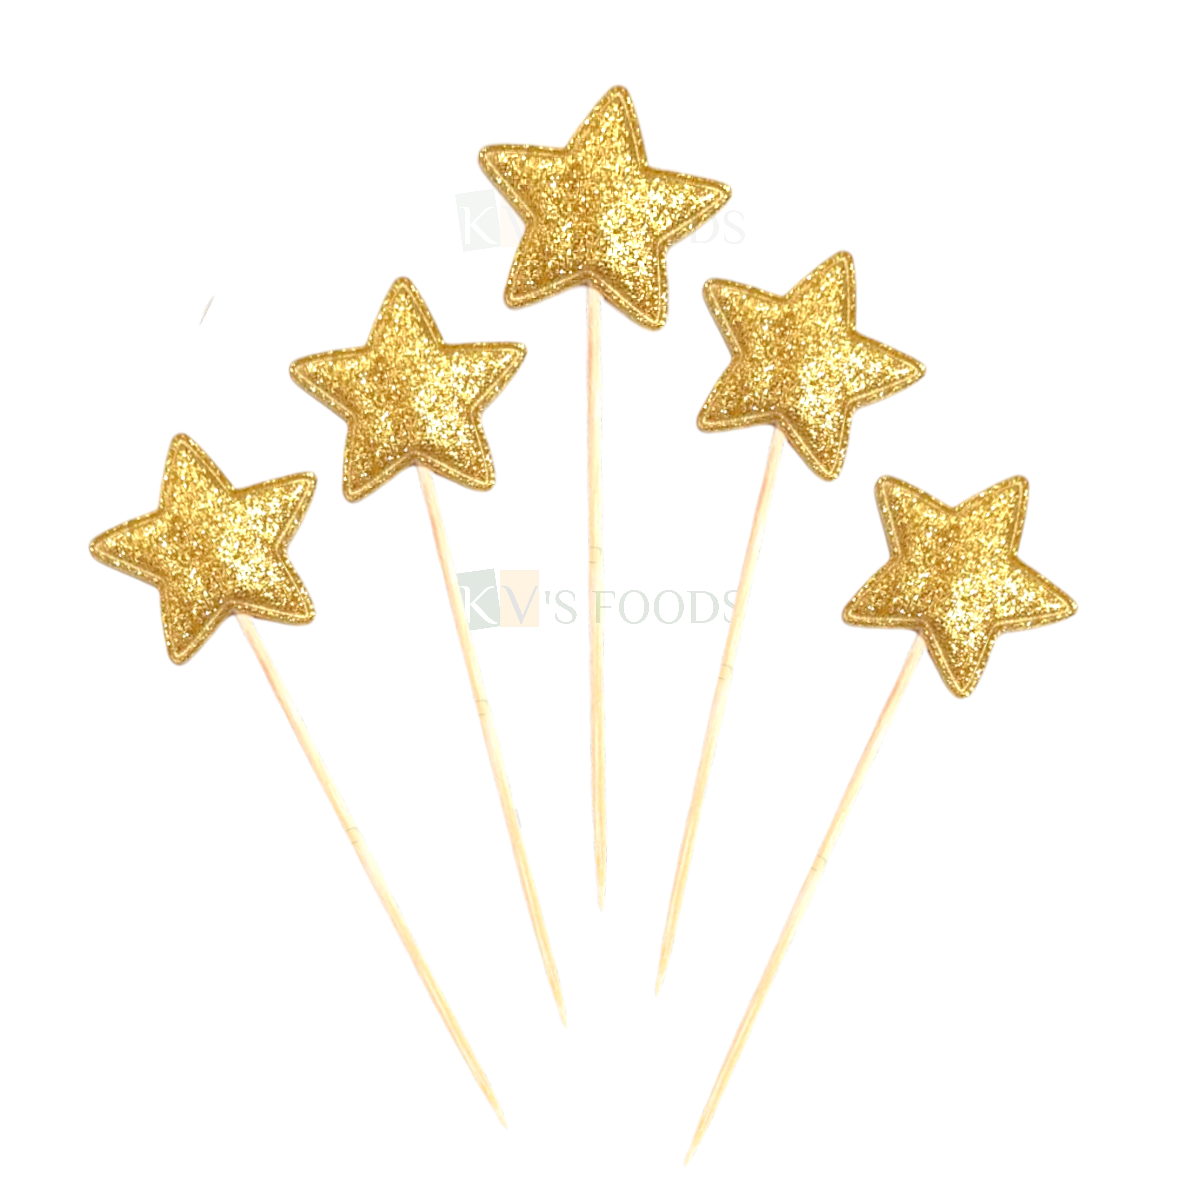 10 PCS Shiny Glittery Golden Star Shape Toothpick Cake Topper Cupcake Toppers Wedding New Years Cakes Decorations Happy Birthday Theme Fruit Pick Foamed Bamboo Toothpicks DIY Cake Decorations